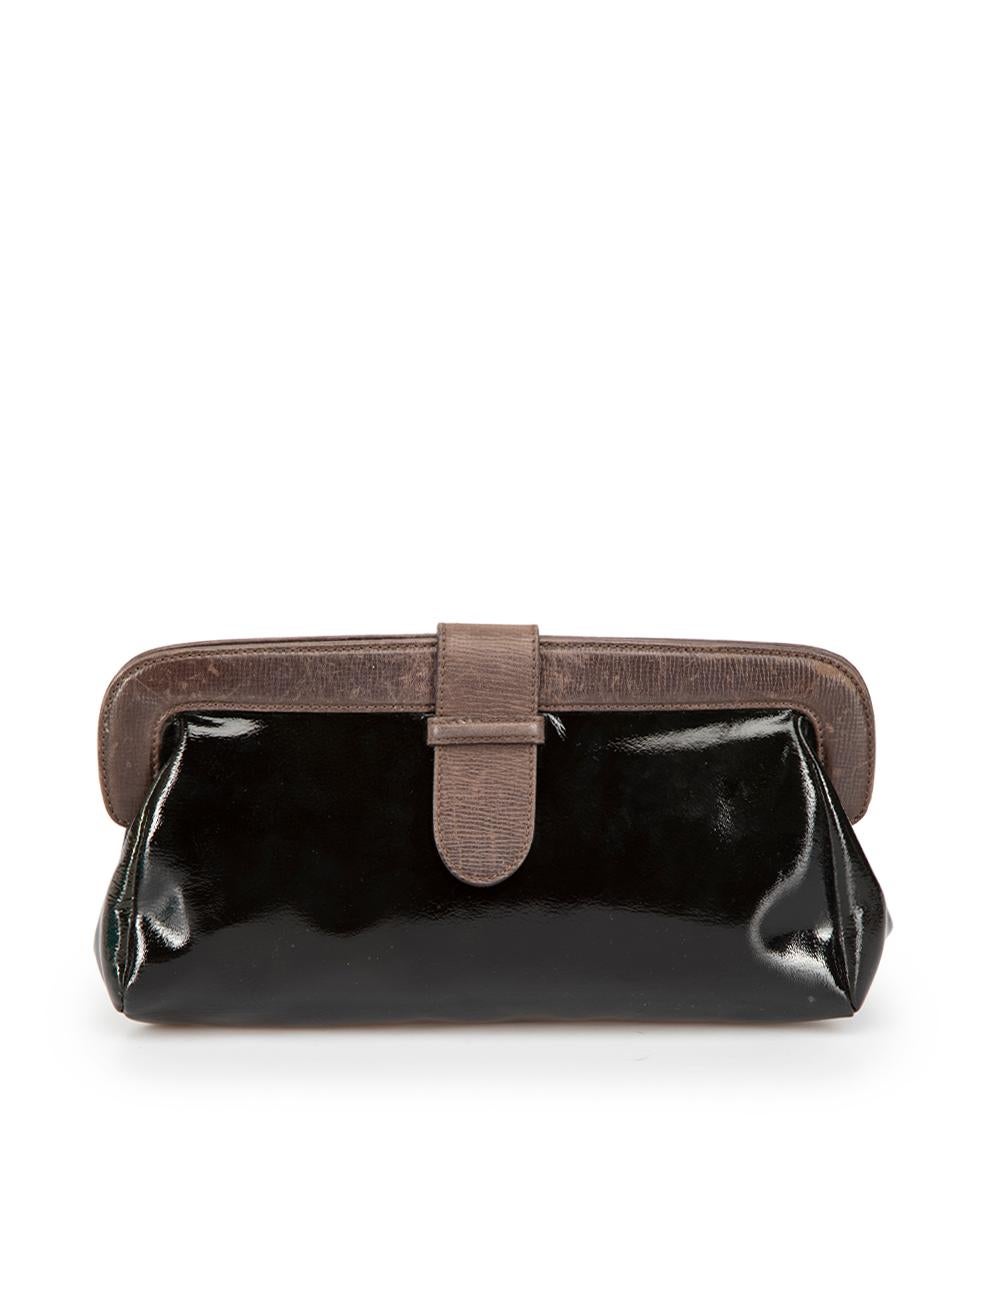 Marni Black Patent Leather Clutch In Excellent Condition For Sale In London, GB